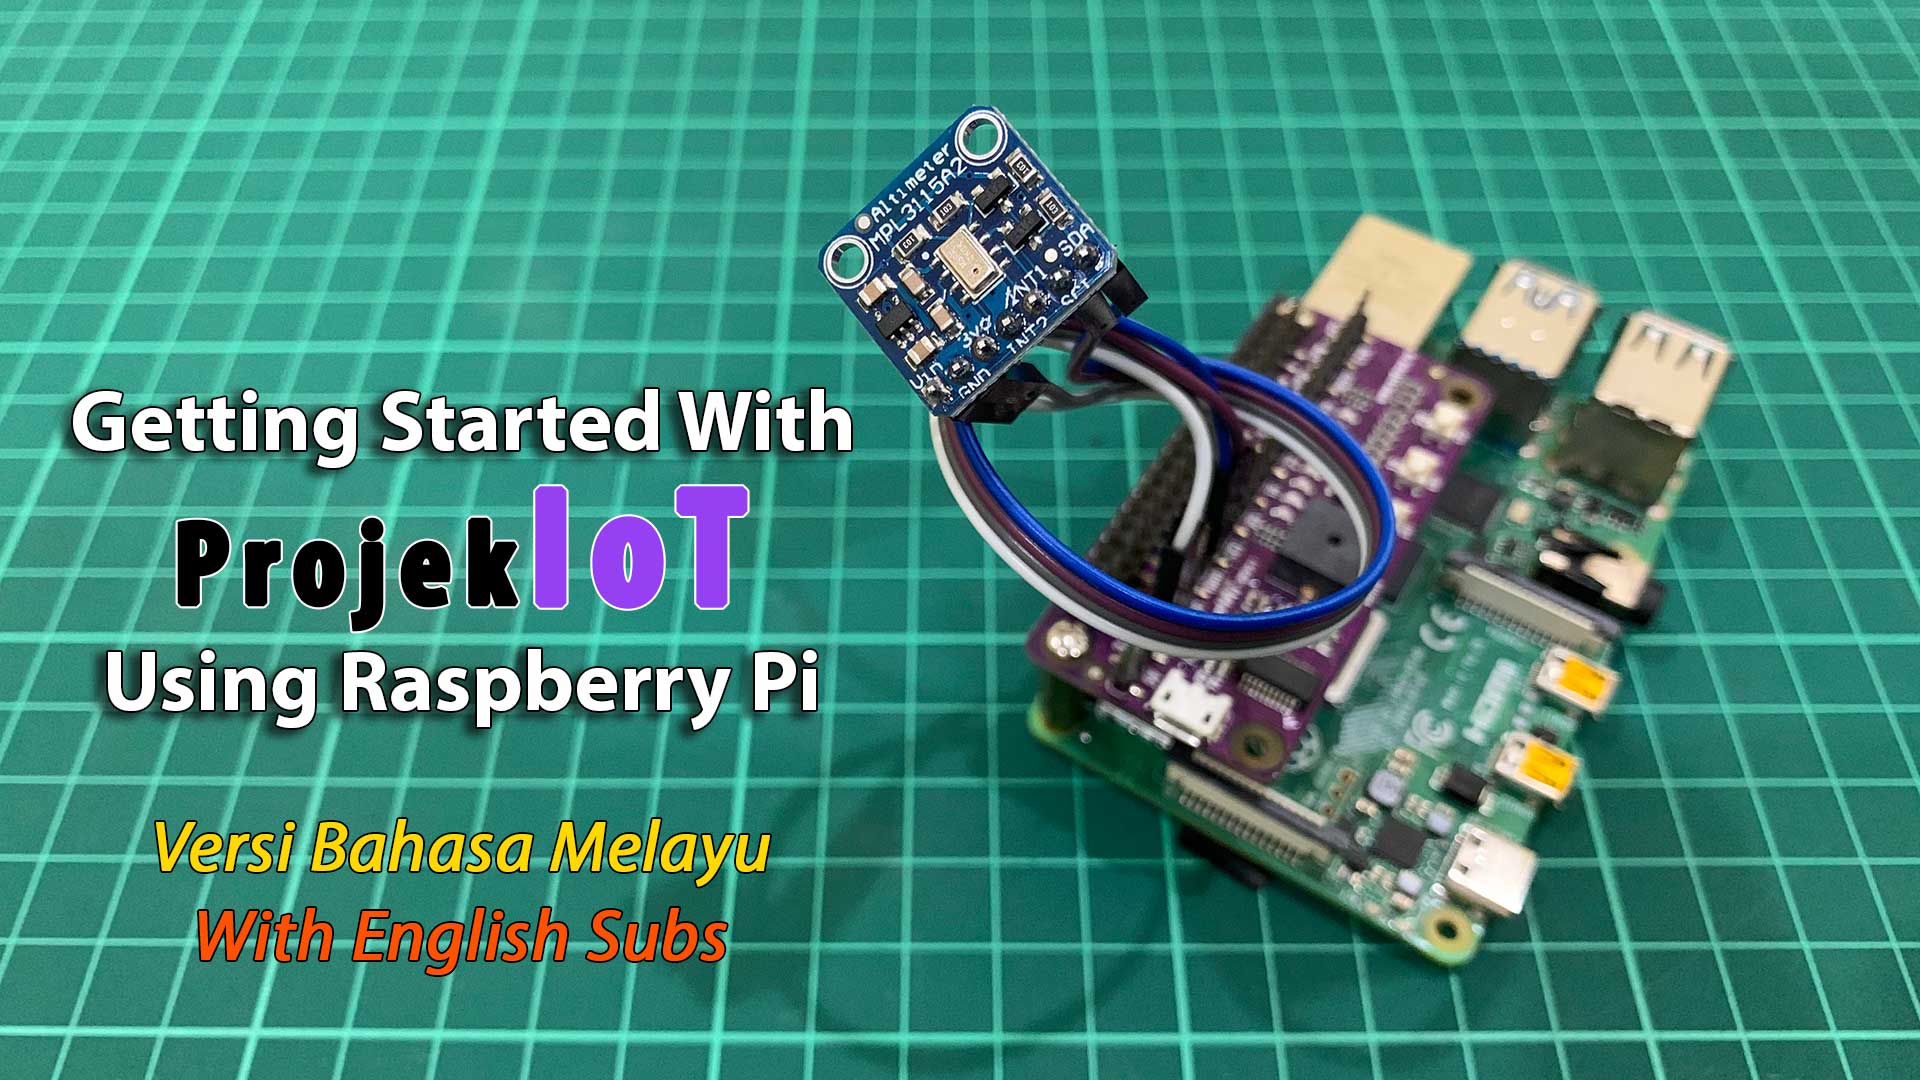 Getting Started With ProjekIoT.com Using Raspberry Pi